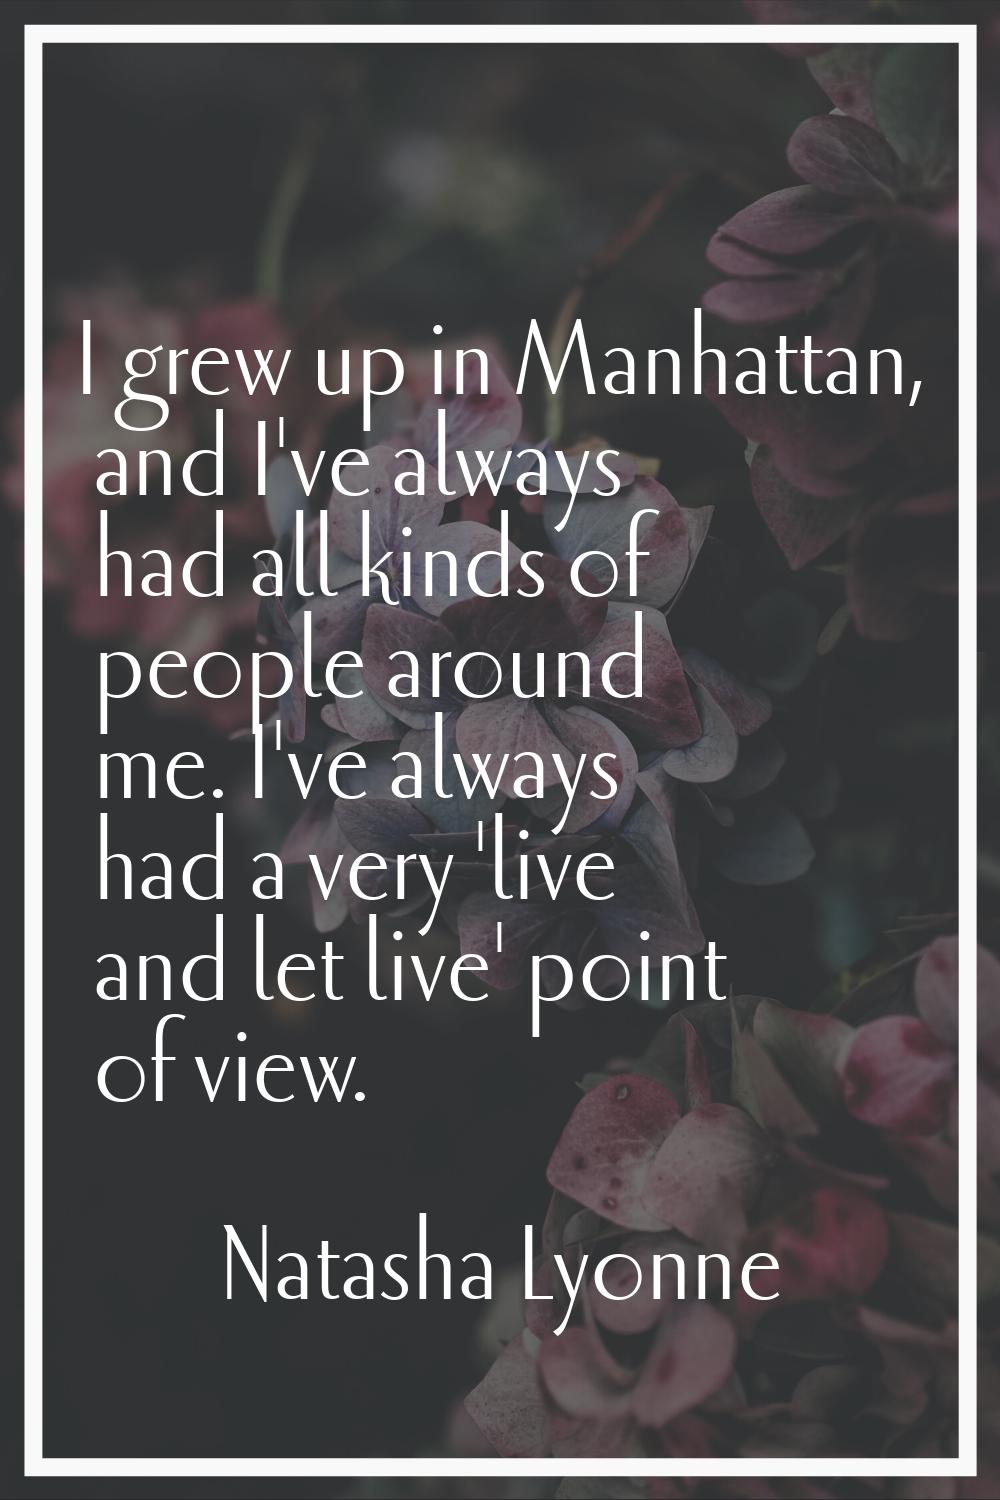 I grew up in Manhattan, and I've always had all kinds of people around me. I've always had a very '